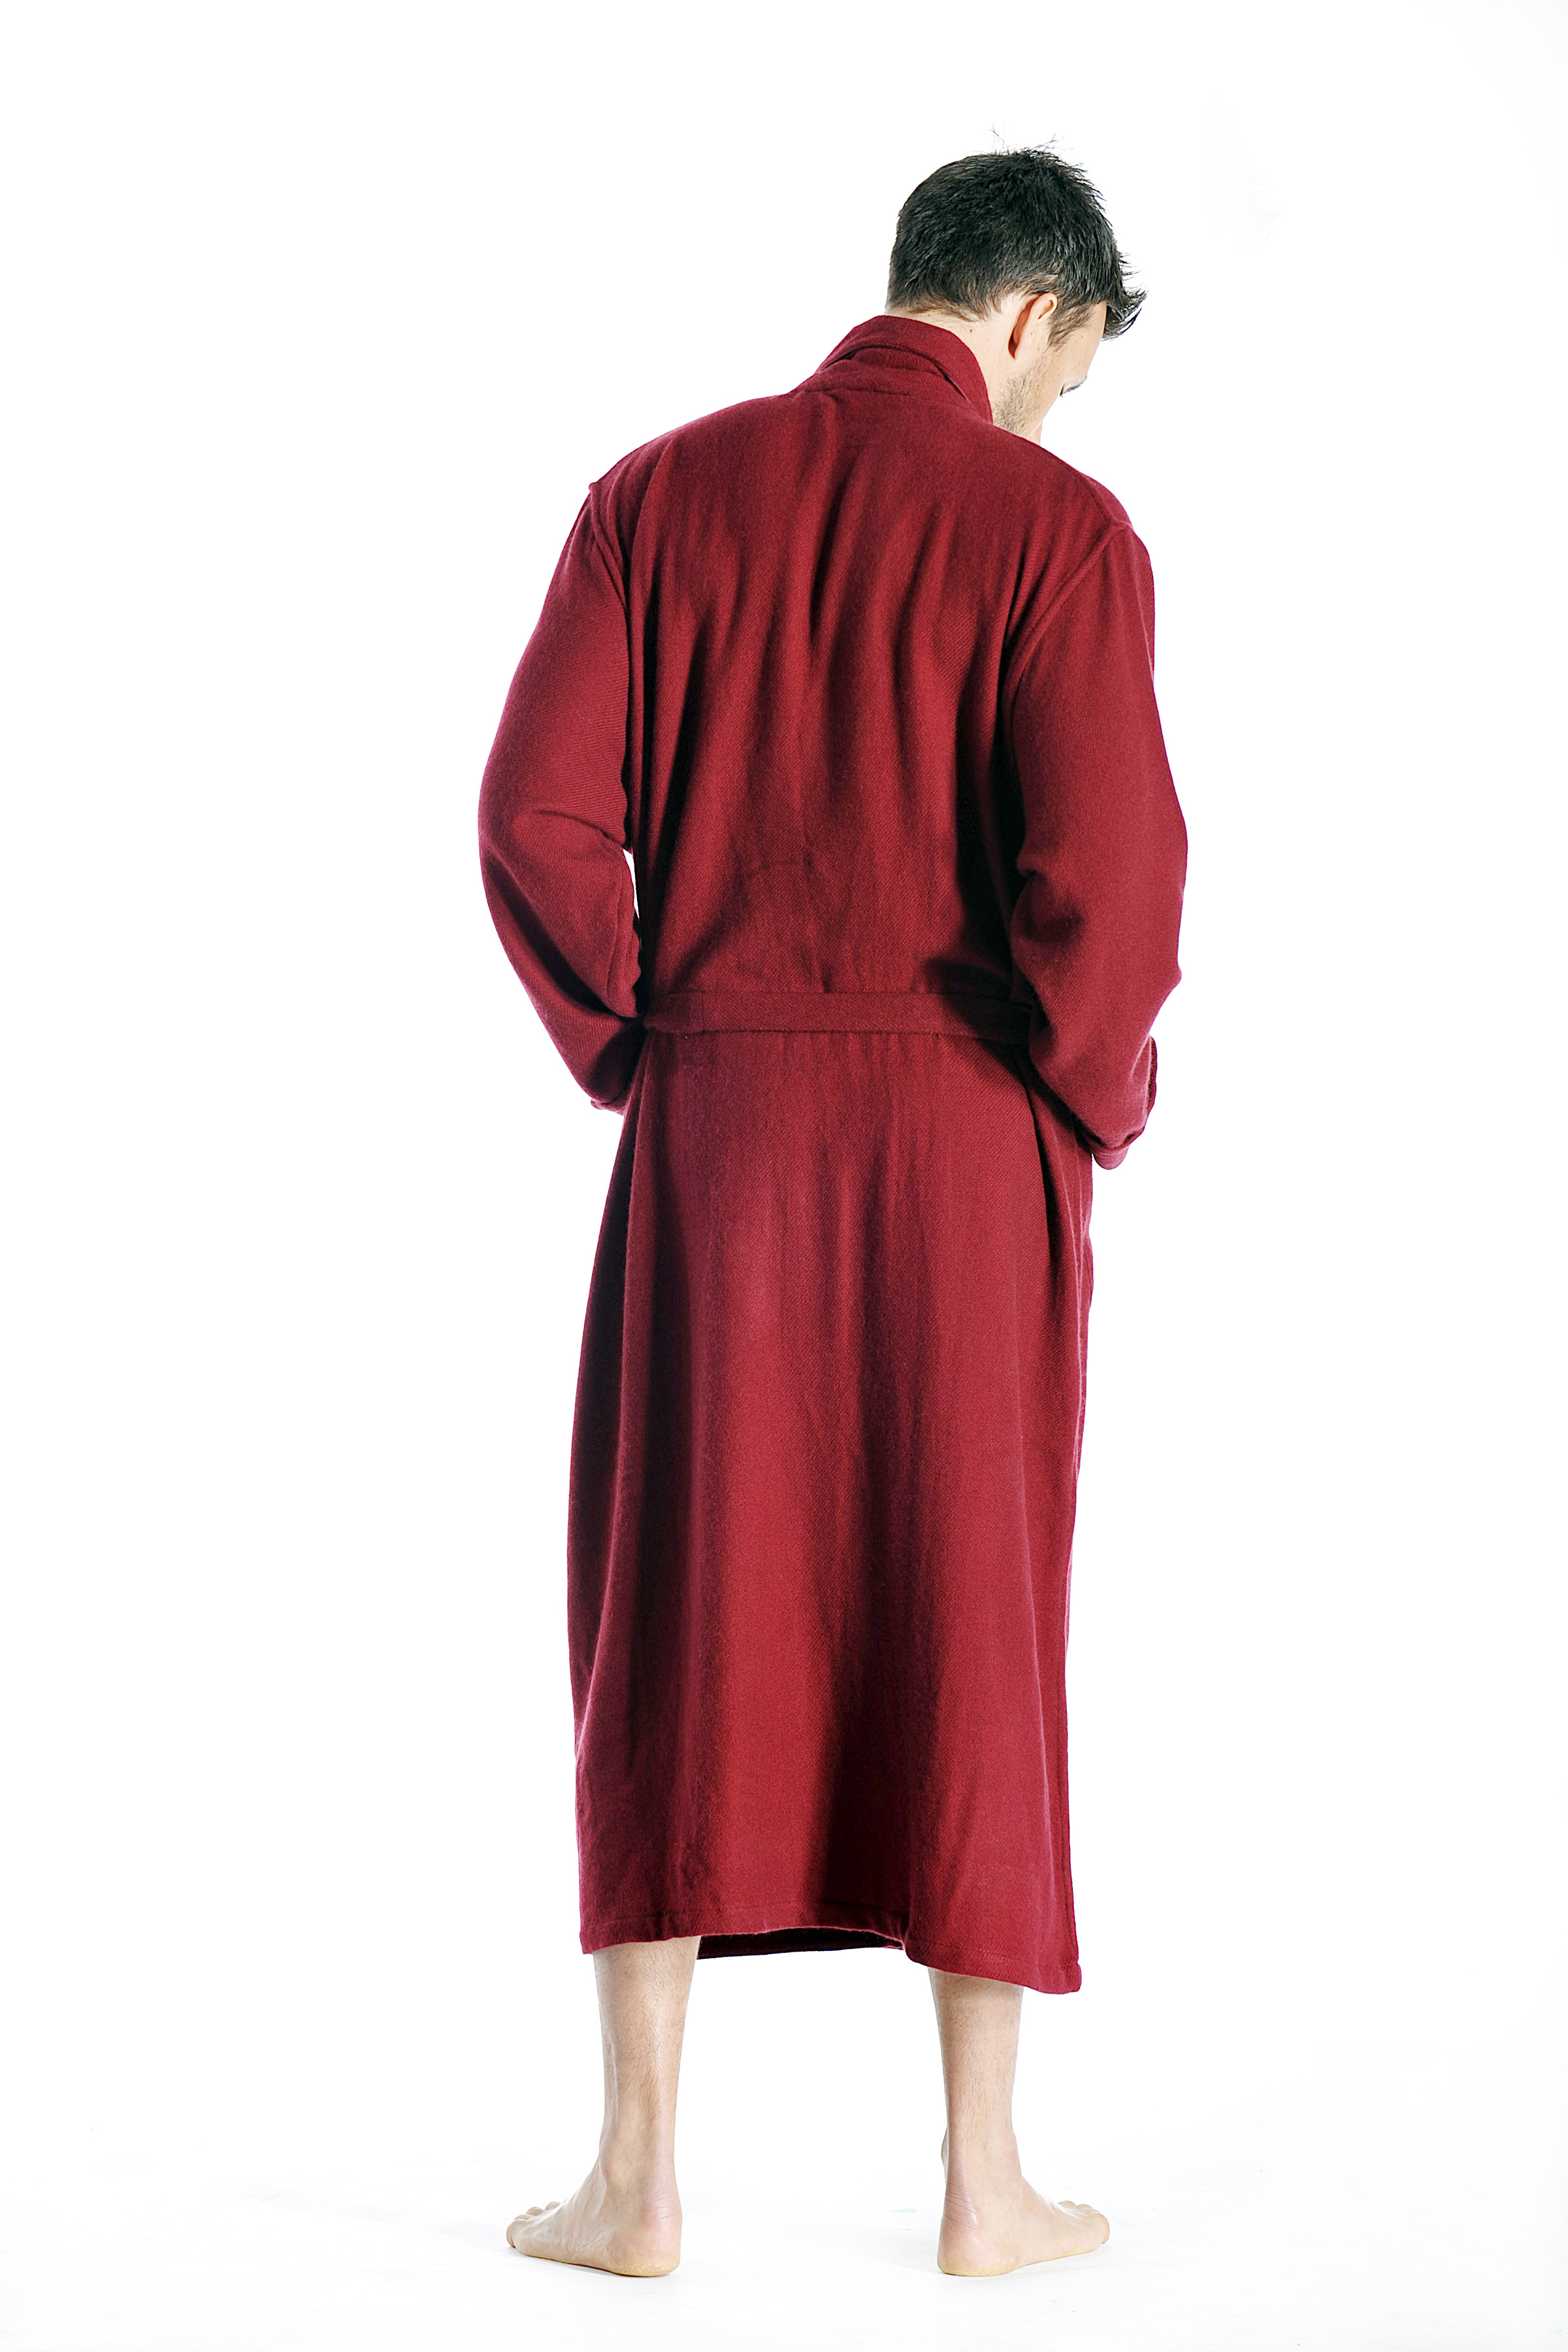 Pure Cashmere Full Length Robe for Men (Navy, Large/Extra Large)